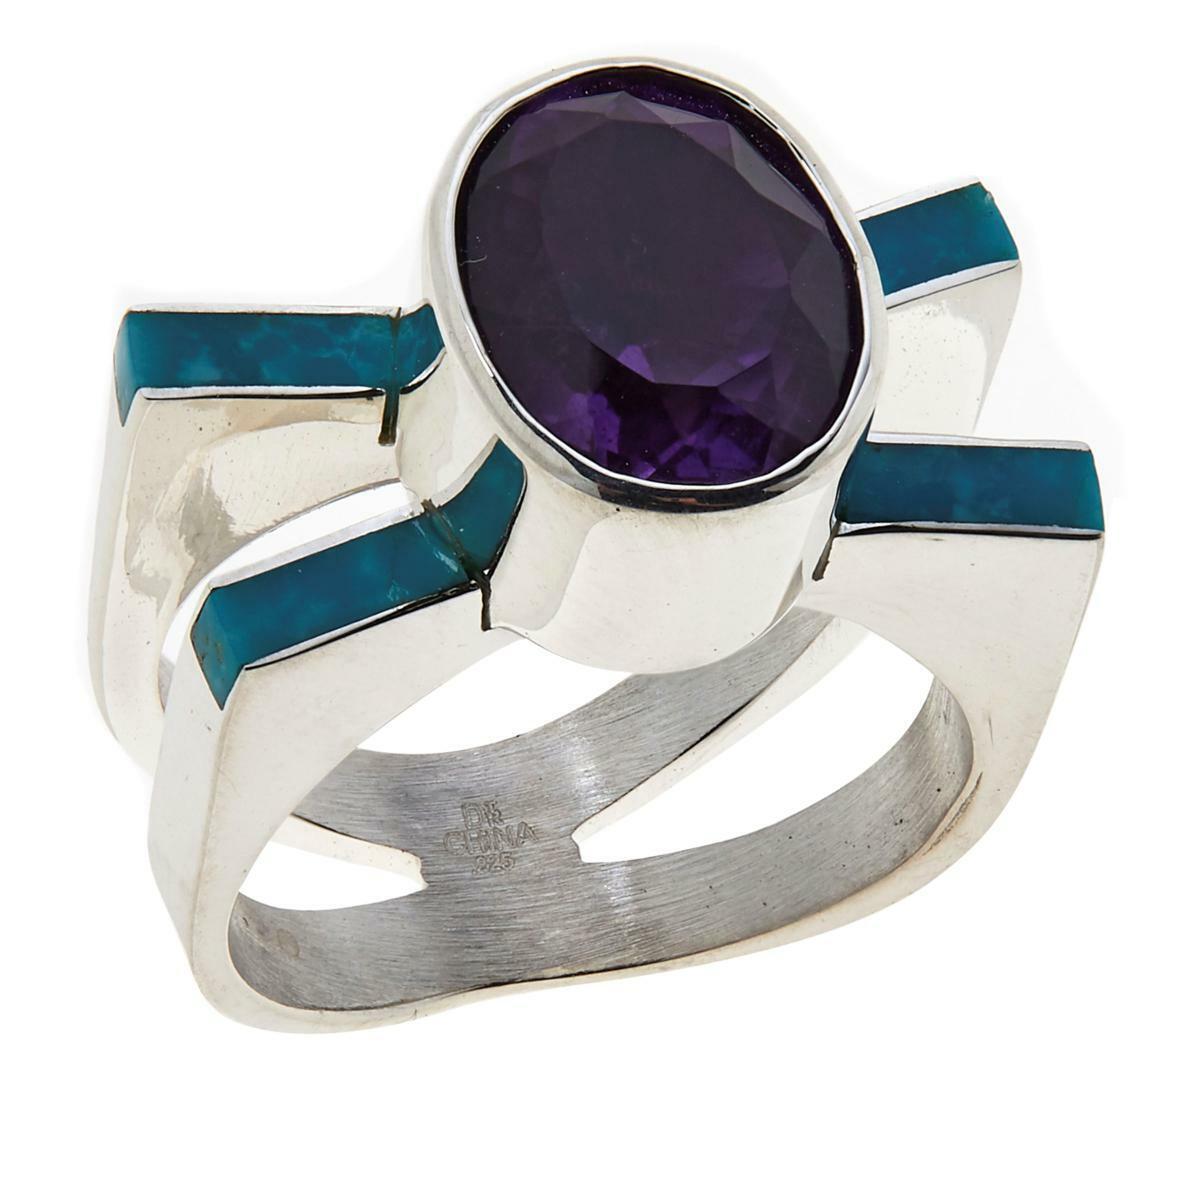 Jay King Gallery Collection Amethyst and Sonoran Blue Turquoise Ring, Size 8